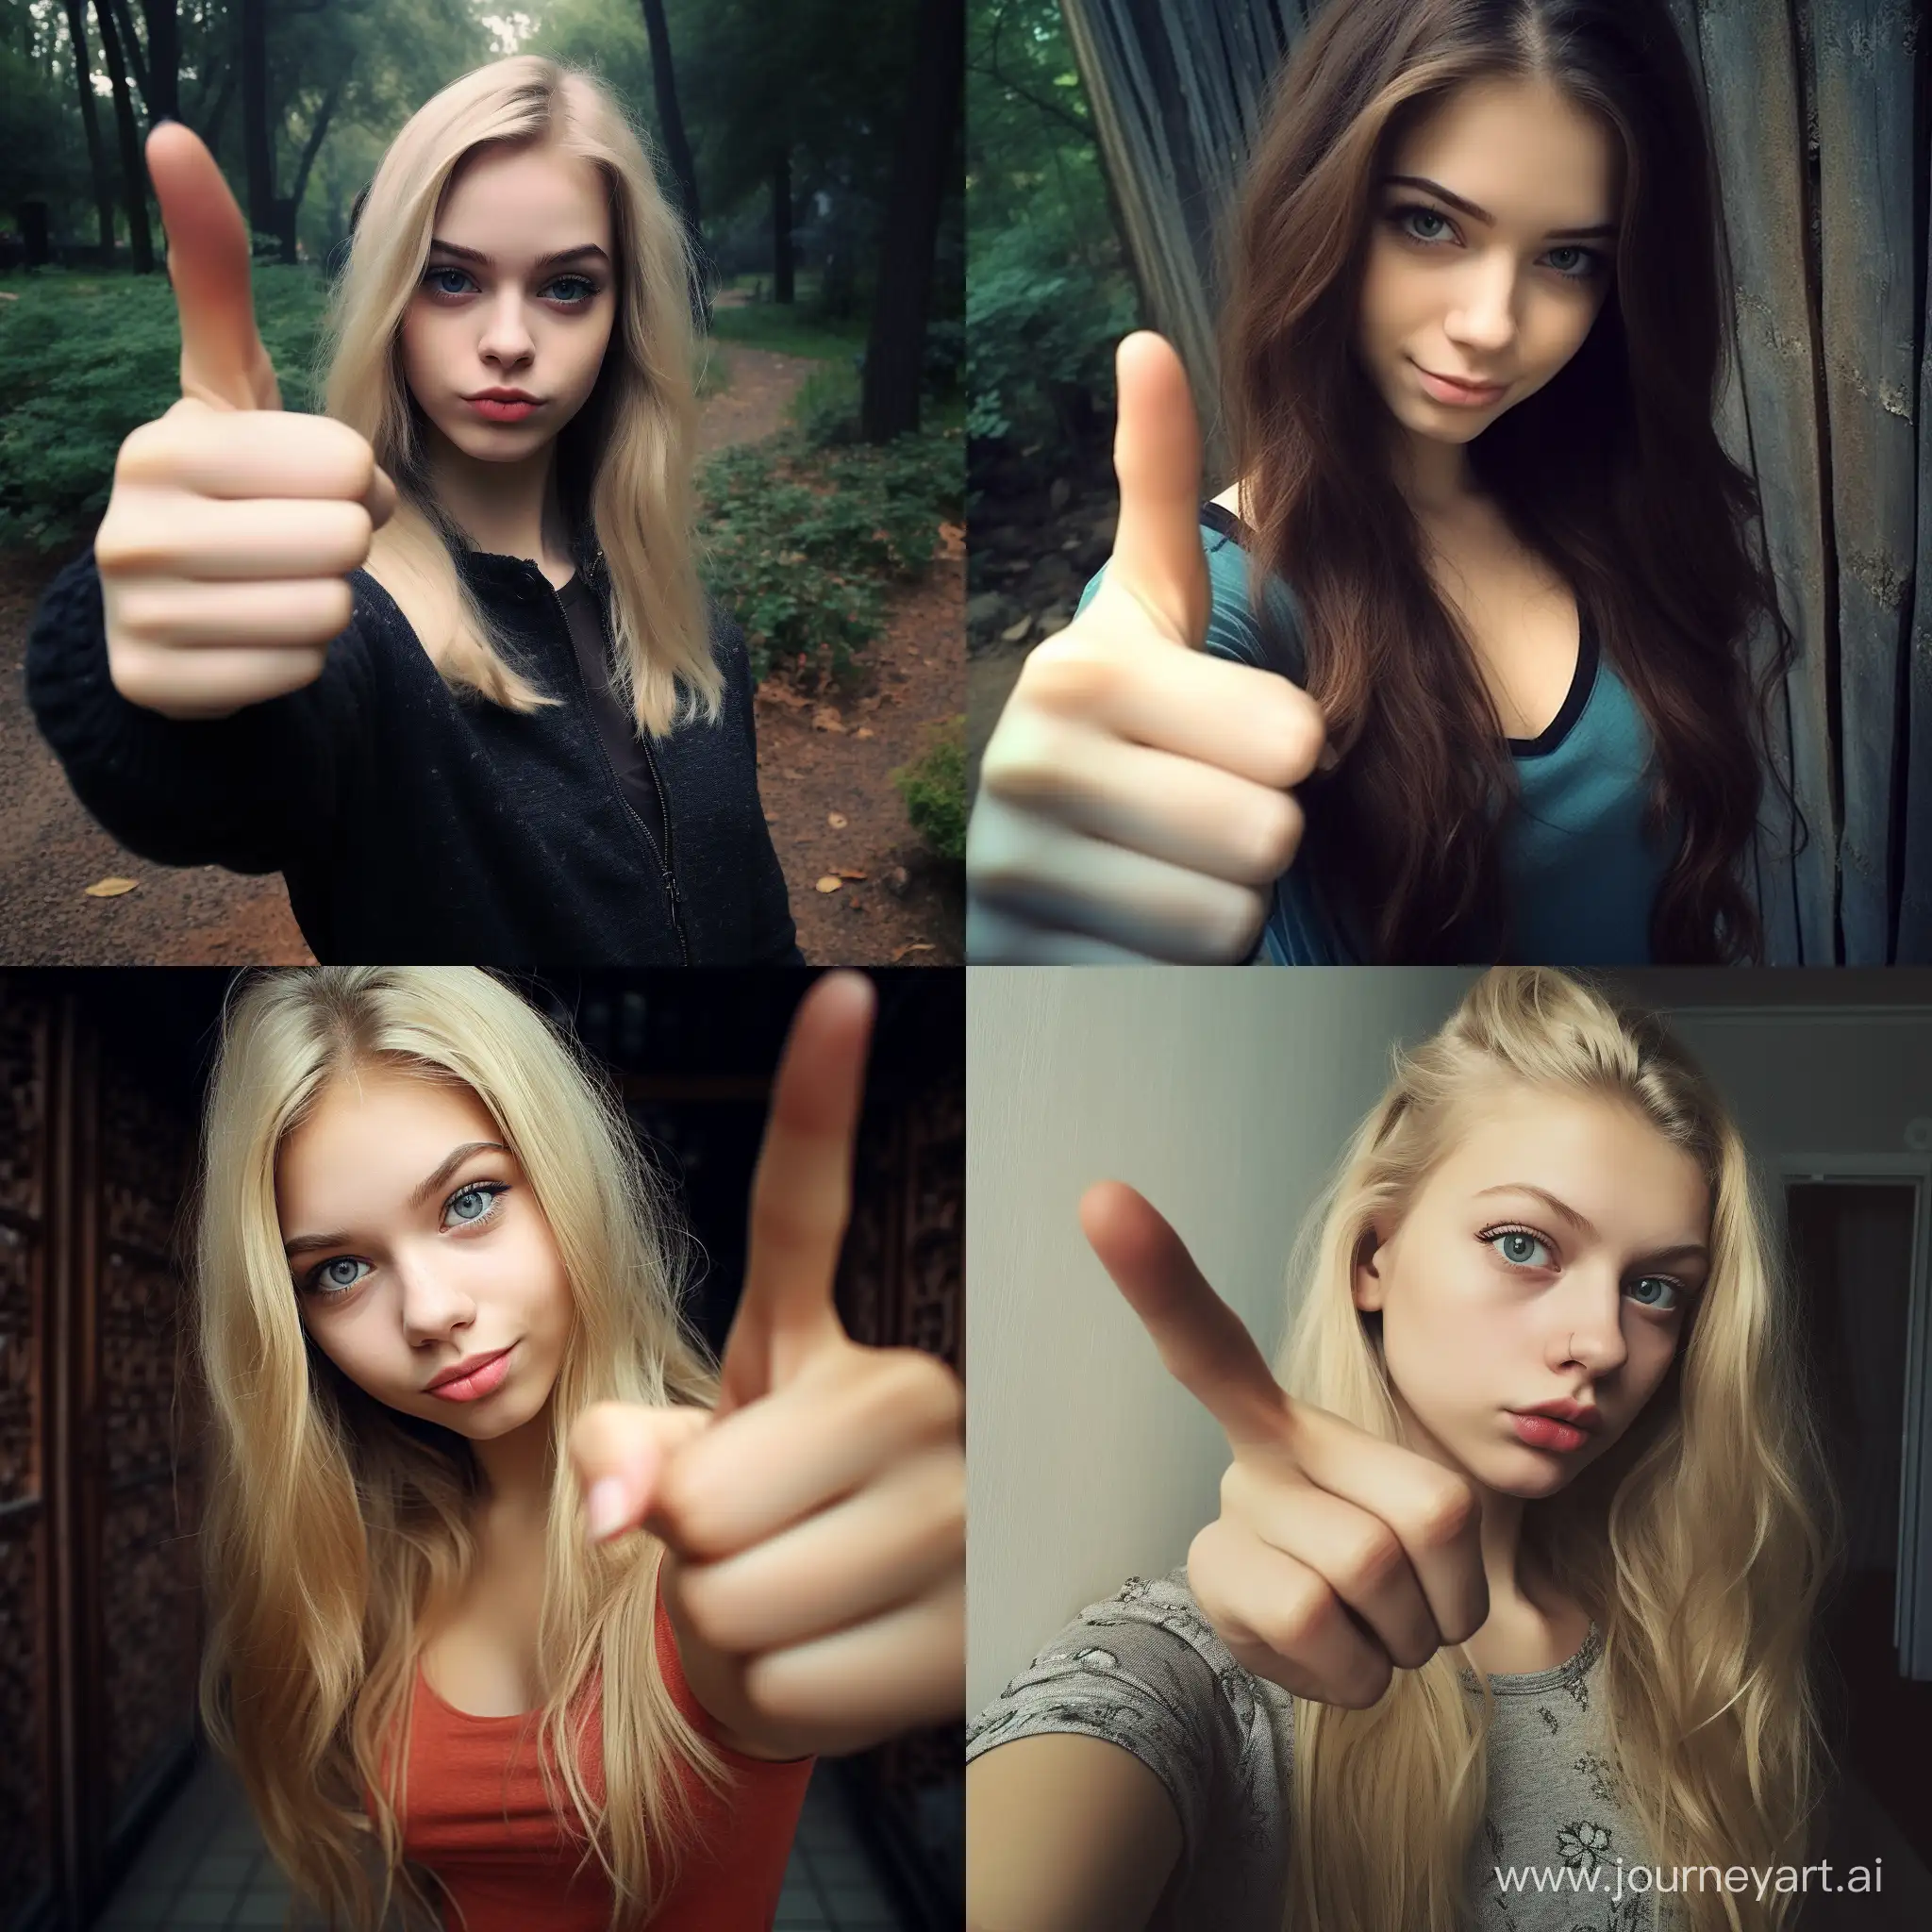 Girl-Expressing-Approval-with-Like-Gesture-in-Closeup-Photo